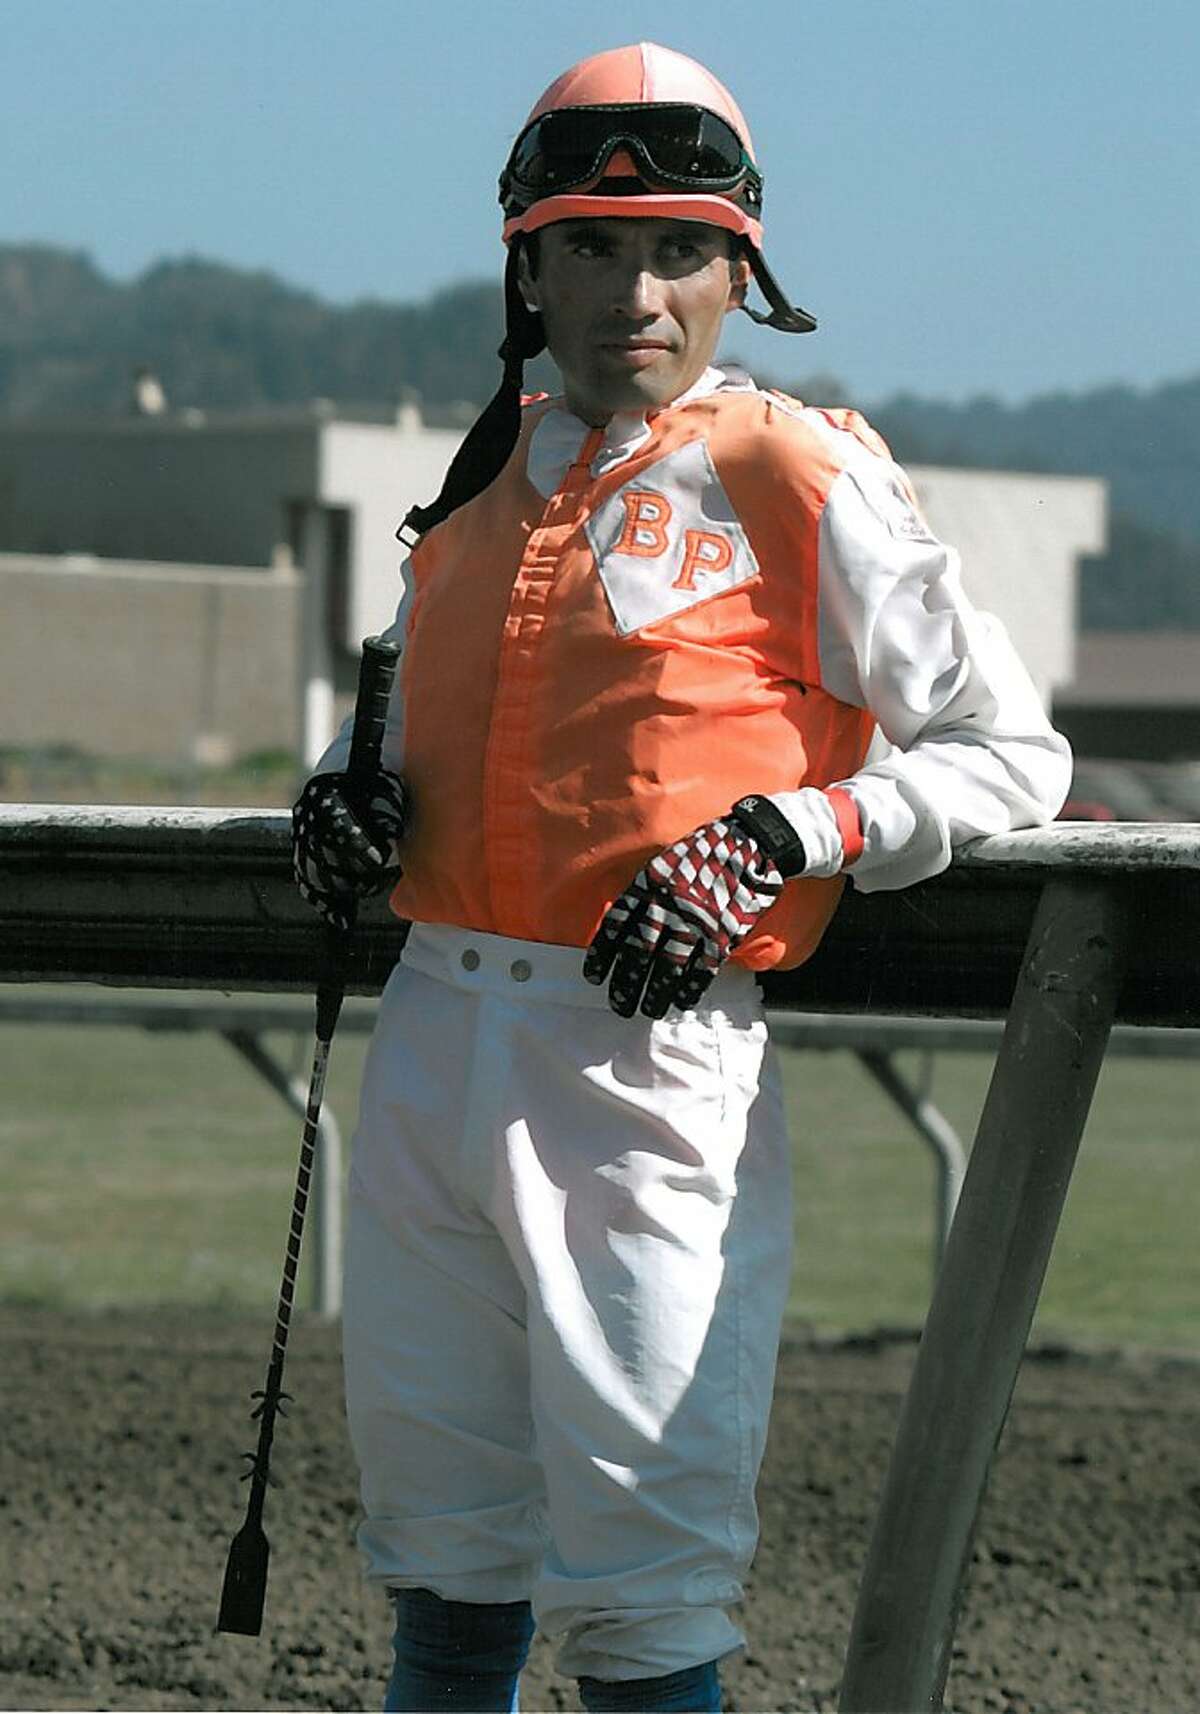 Jockey Jorge Herrera died after he was thrown from race horse Morito during a race at the Alameda County Fairgrounds in Pleasanton, Calif. on Thursday, July 5, 2012.